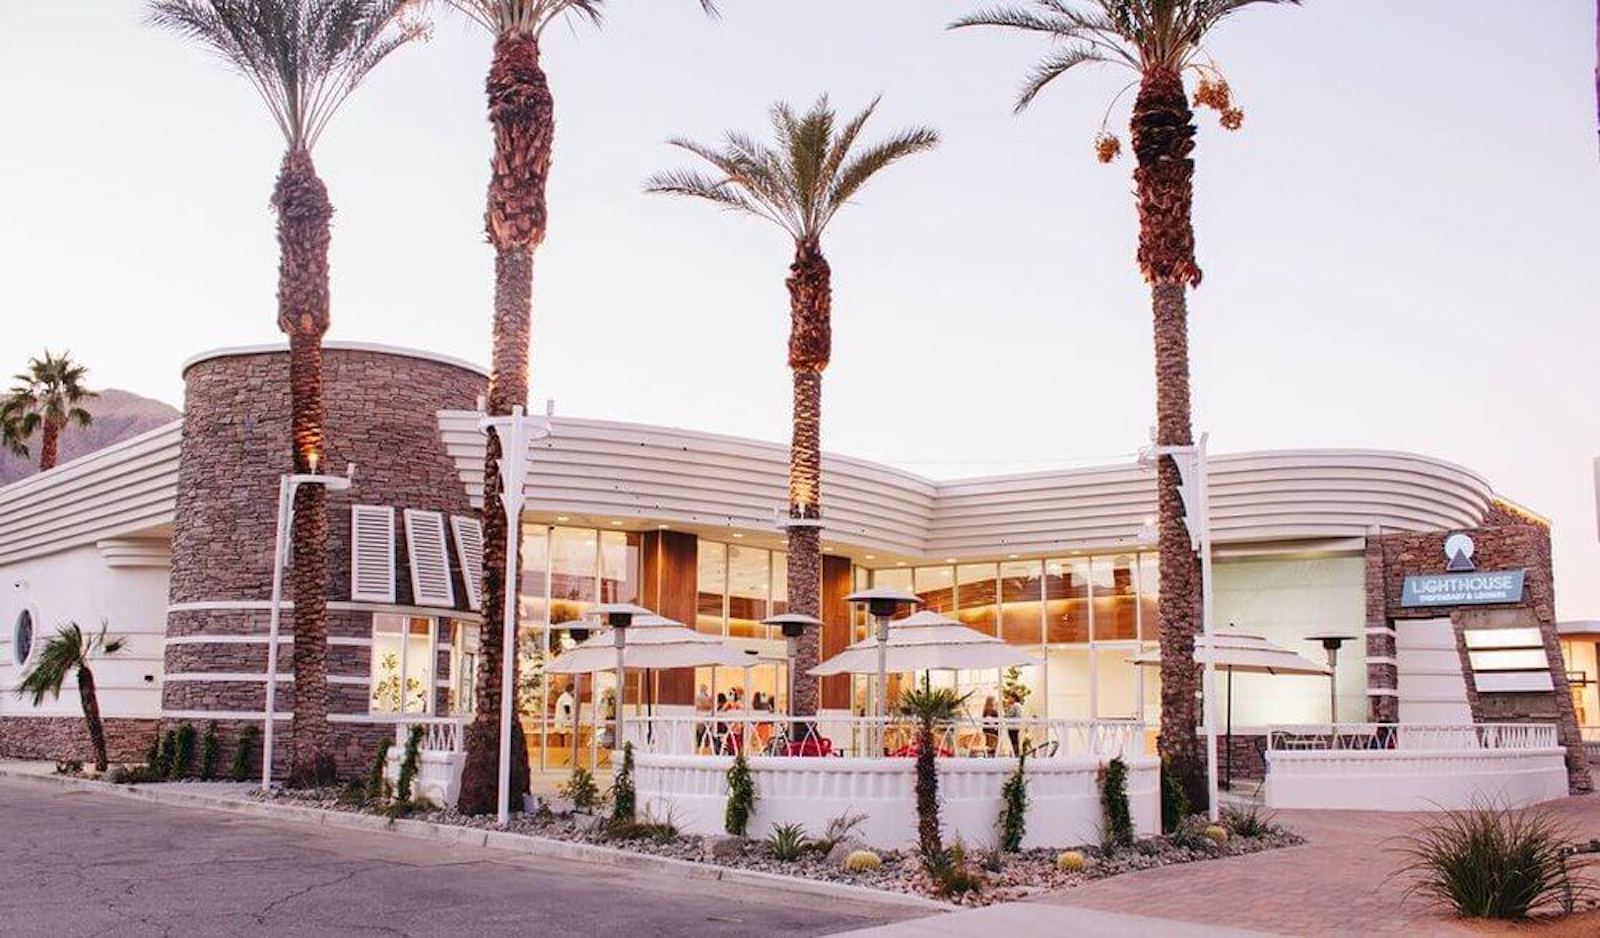 Full width image of the exterior of The Lighthouse Dispensary in Palm Springs